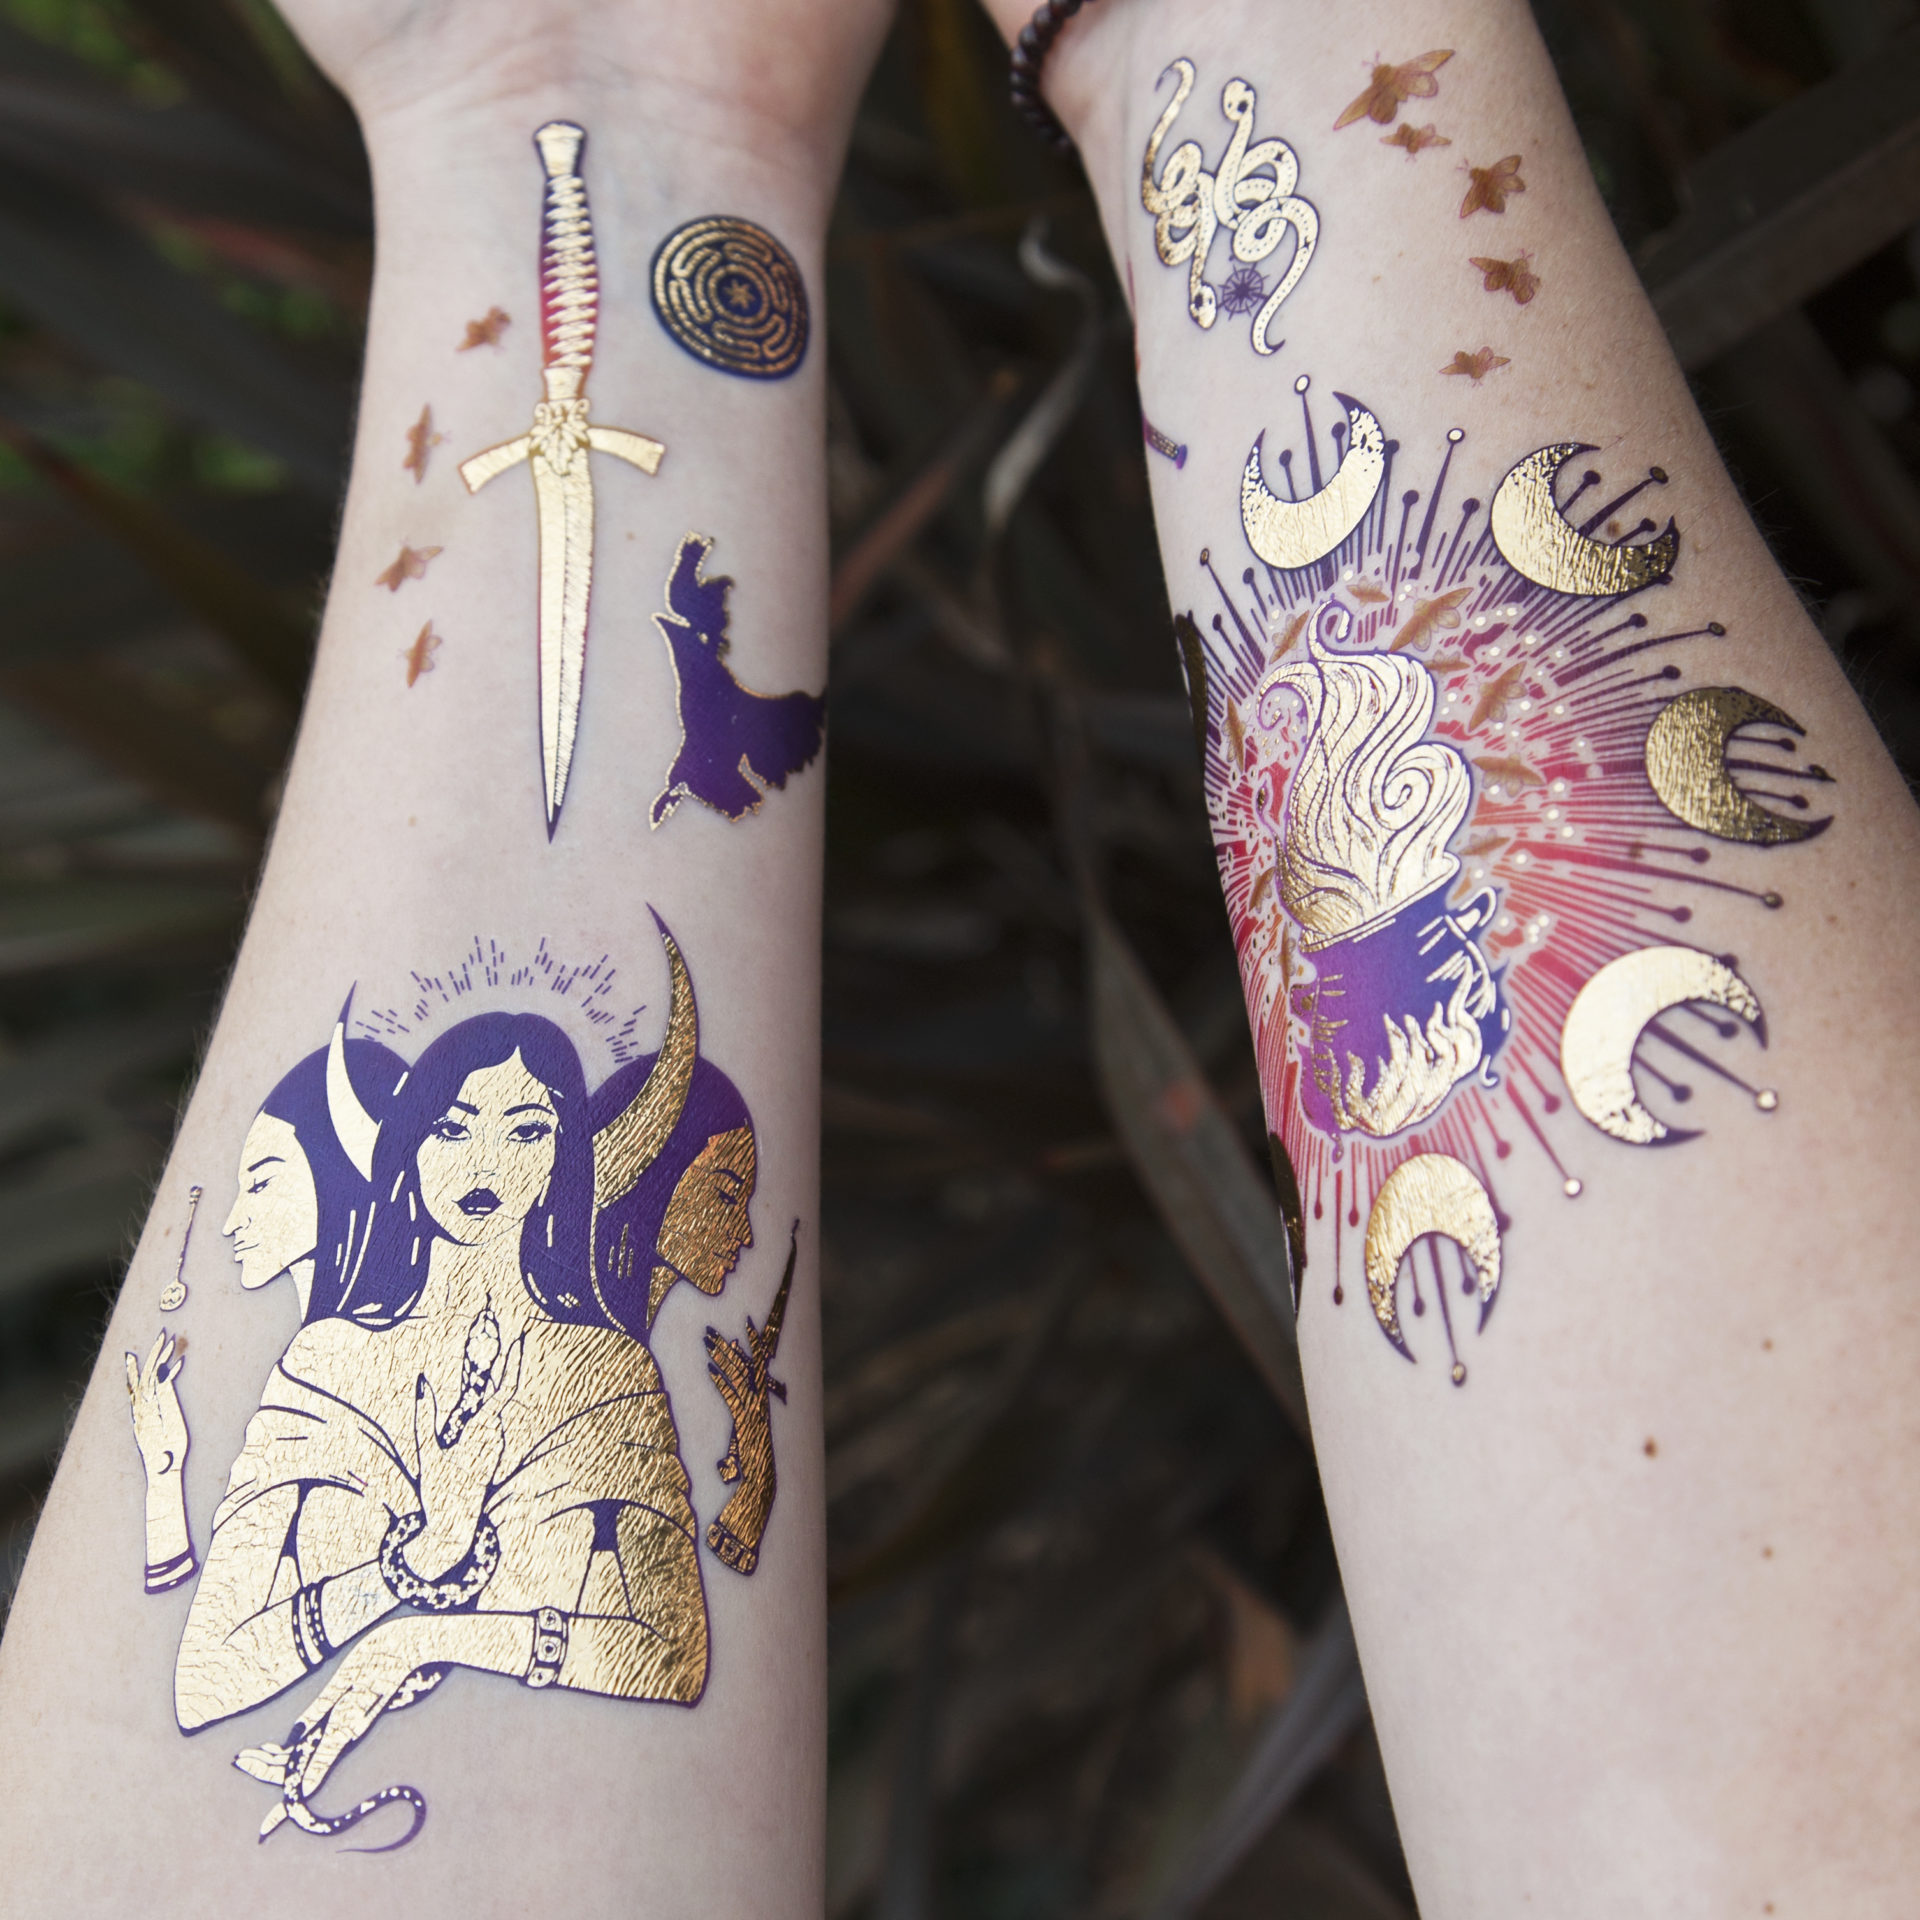 Sage Goddess Hecate Flash Tattoos for mystery and transformation